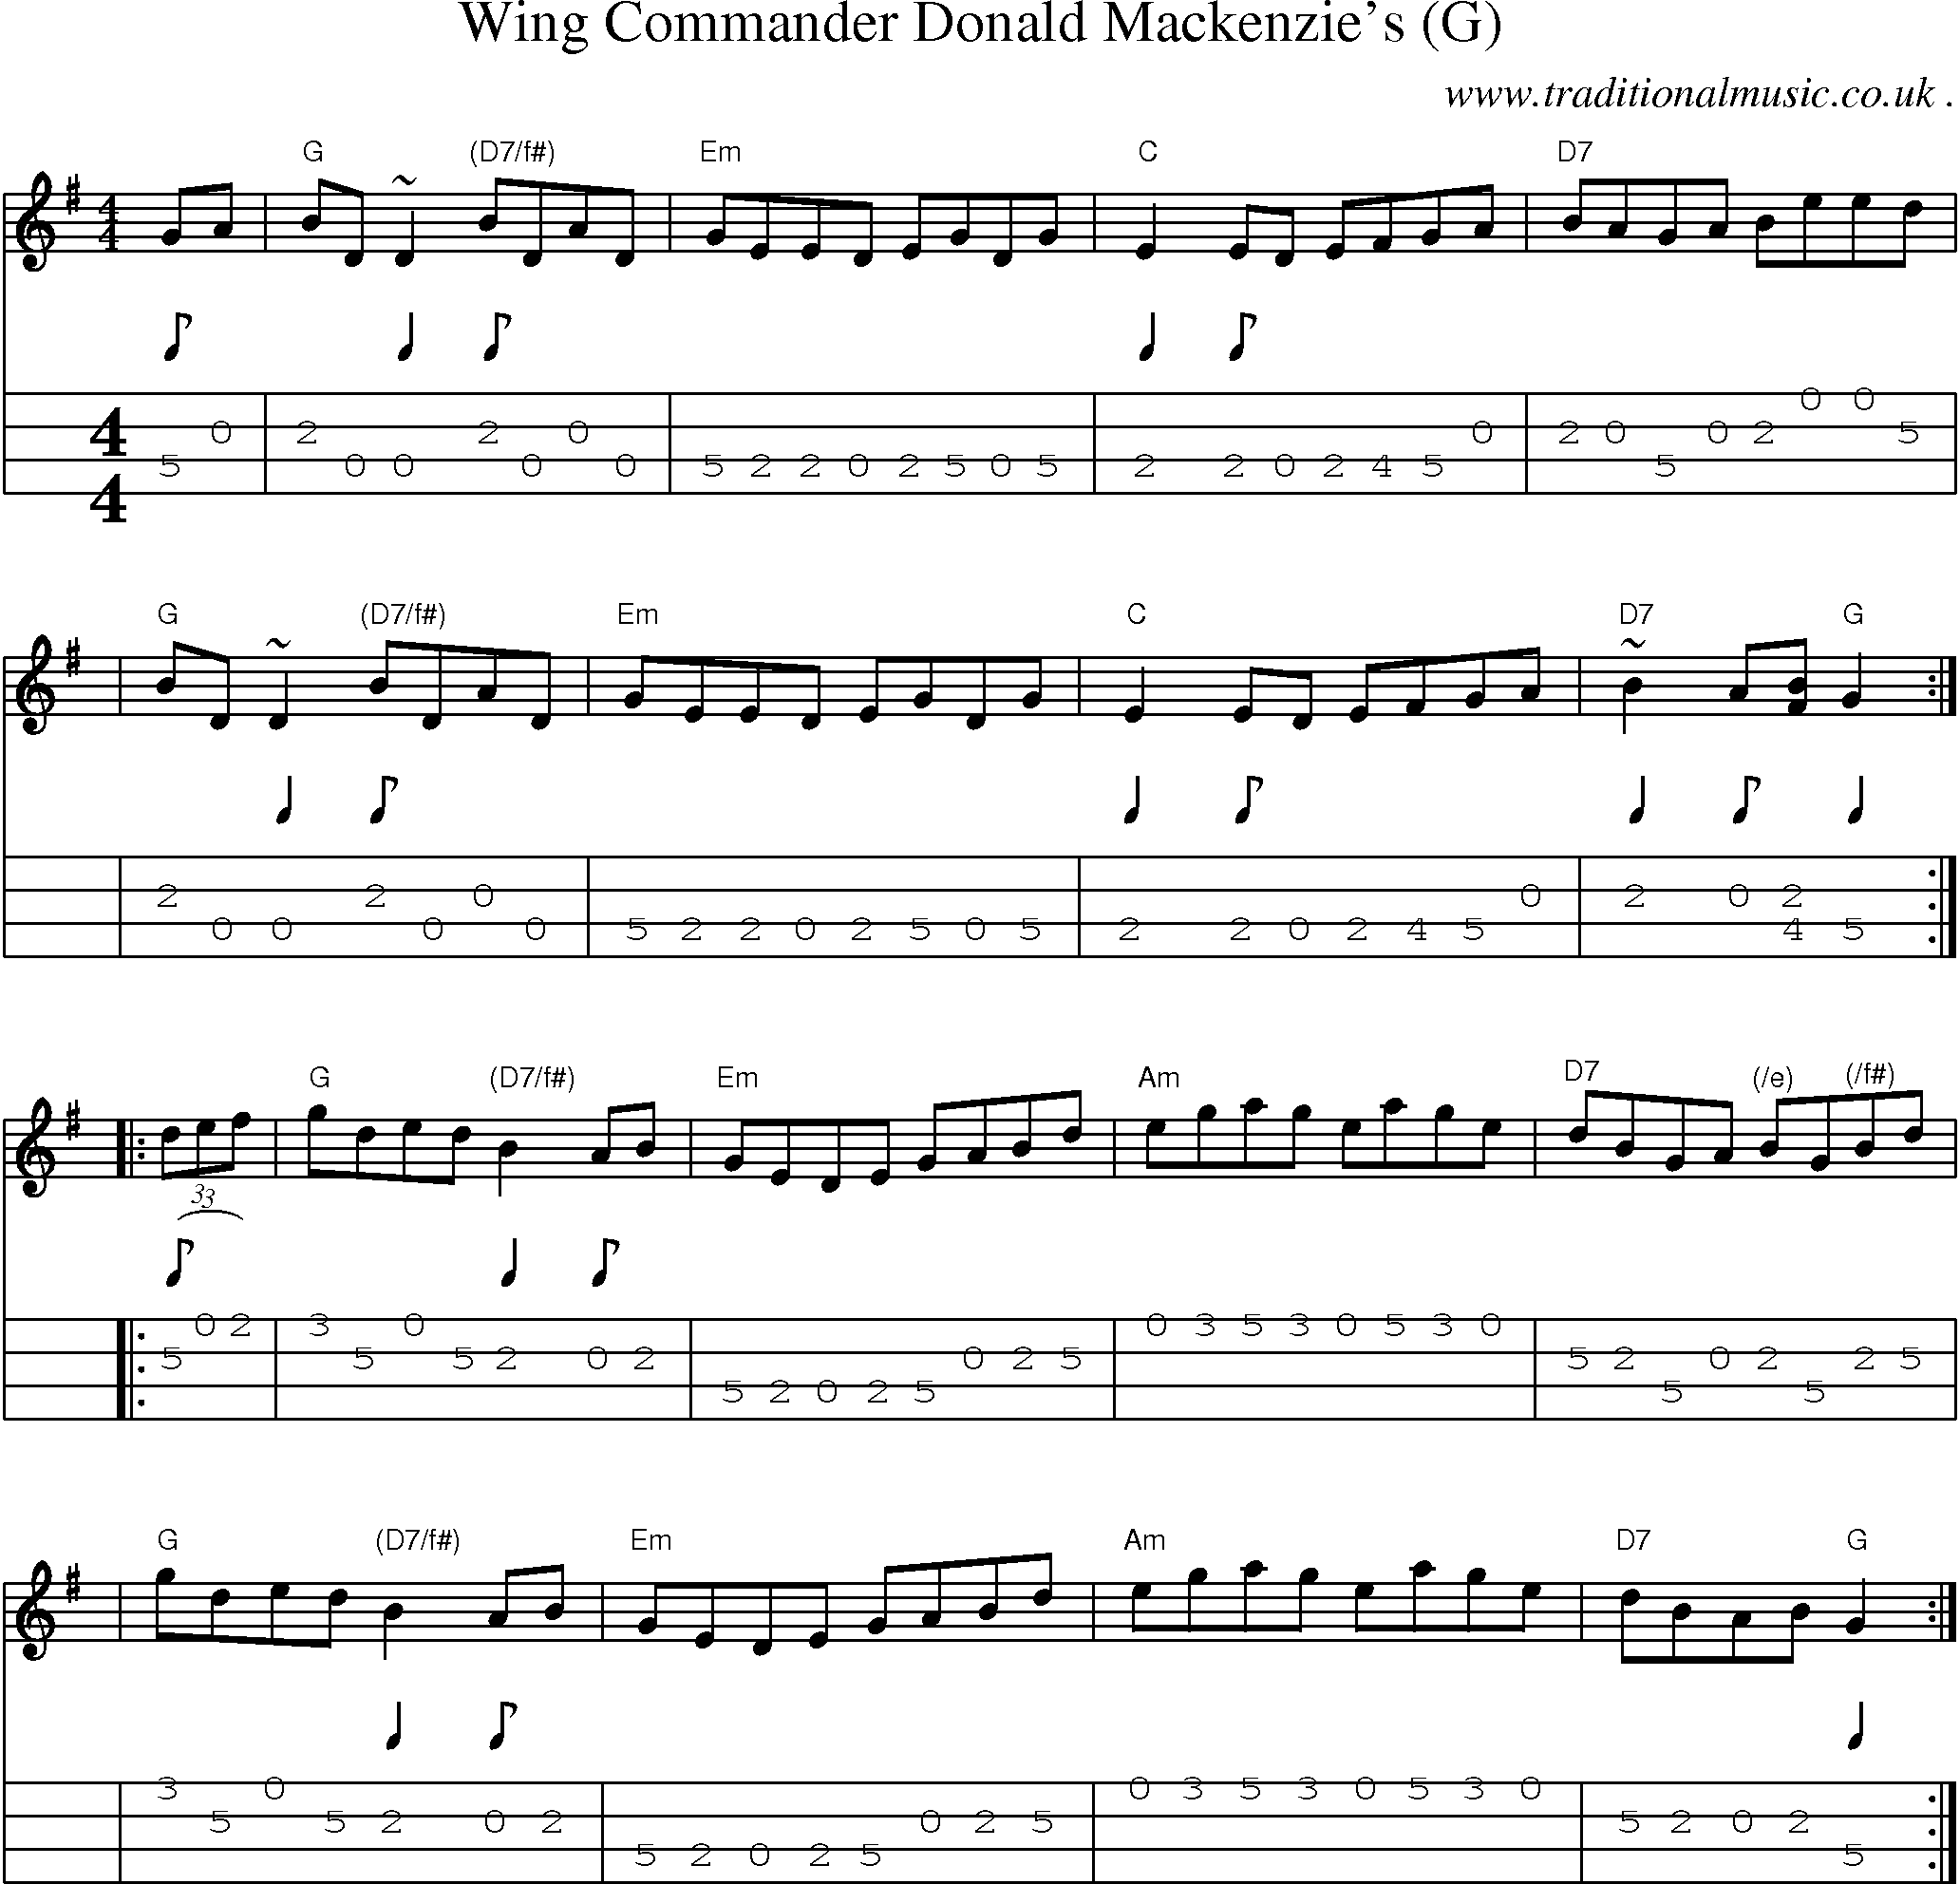 Sheet-music  score, Chords and Mandolin Tabs for Wing Commander Donald Mackenzies G